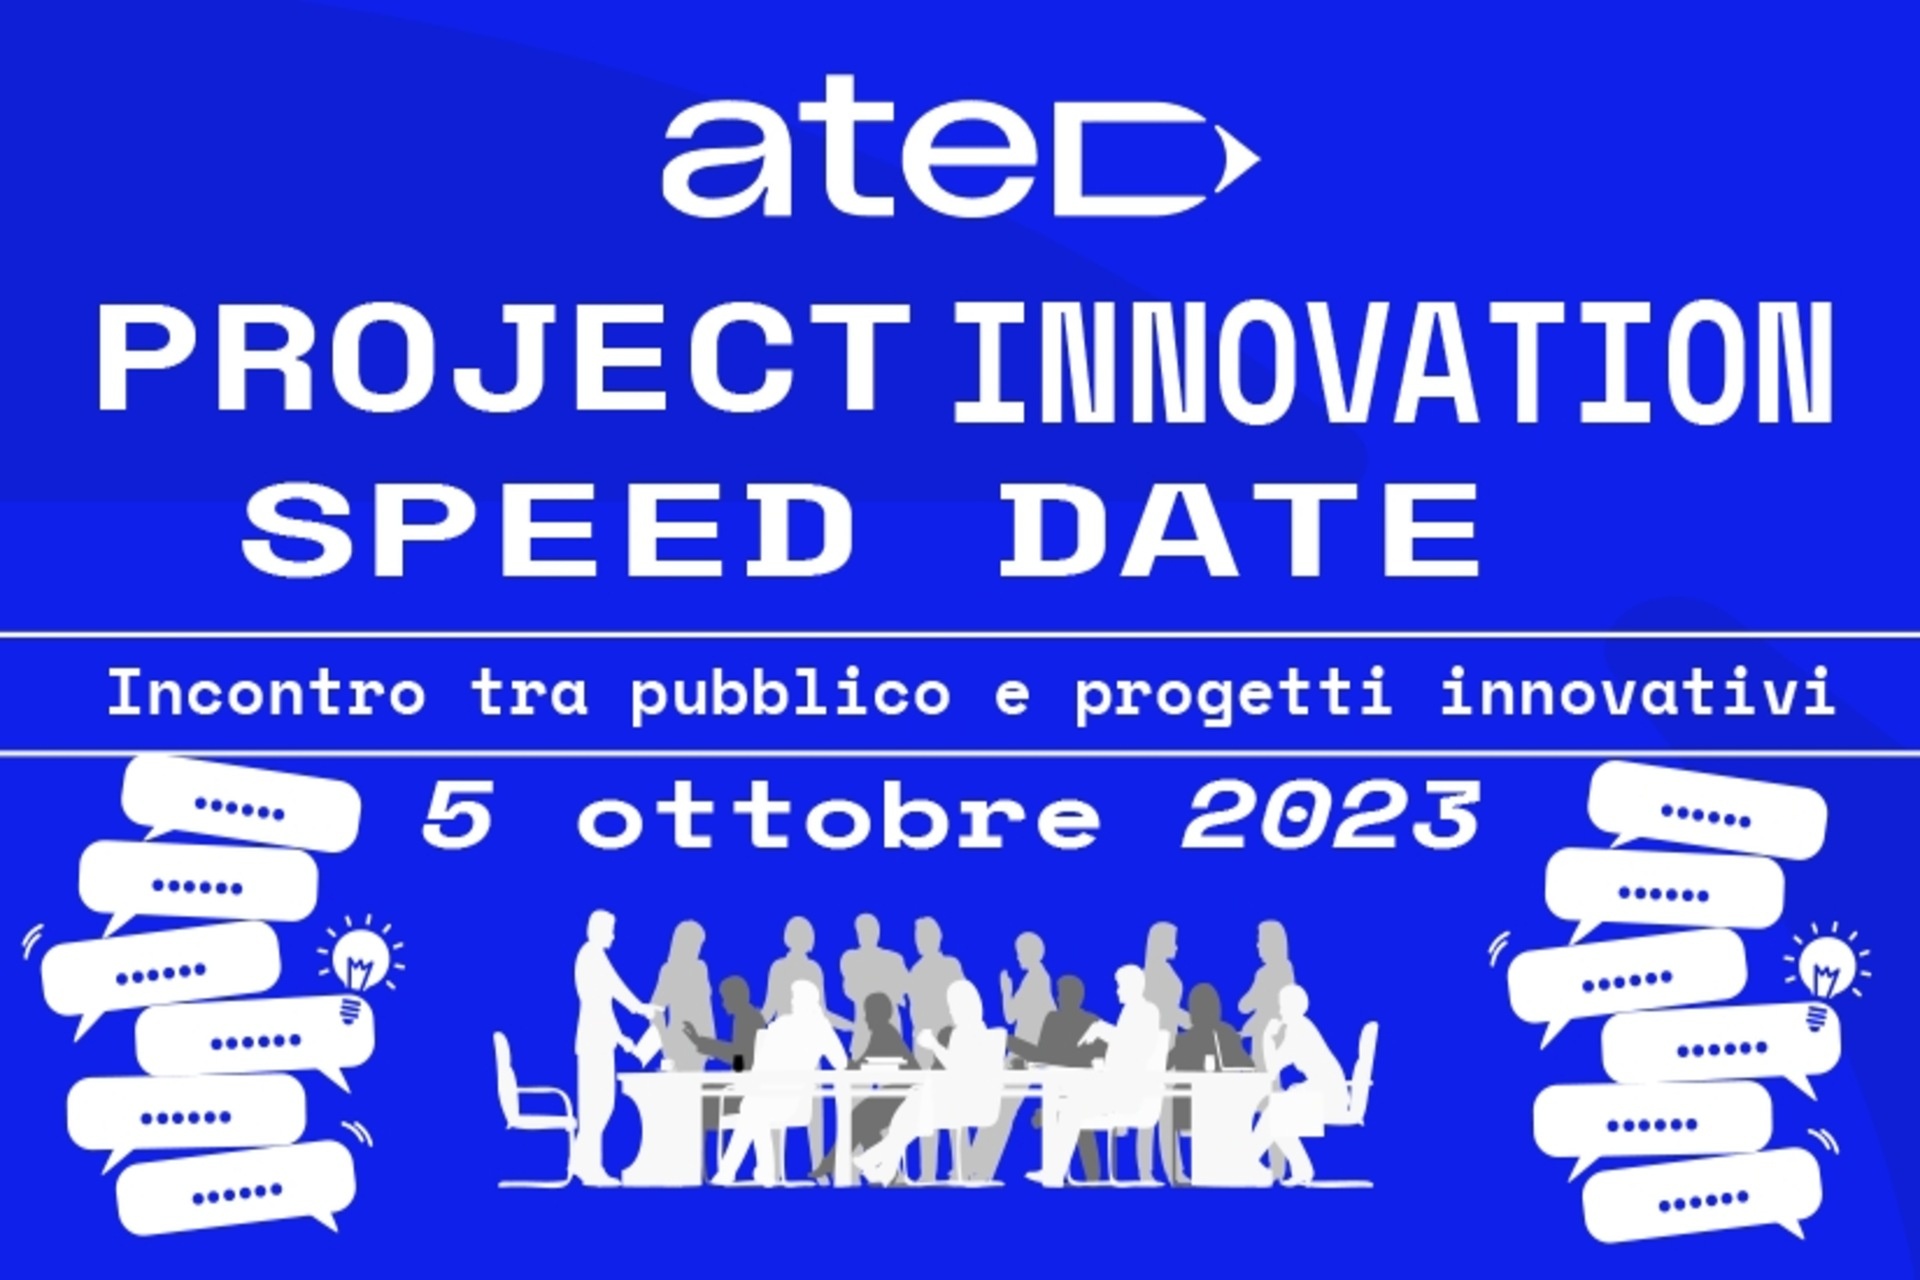 Projekti: poster ATED Project Innovation Speed ​​Date